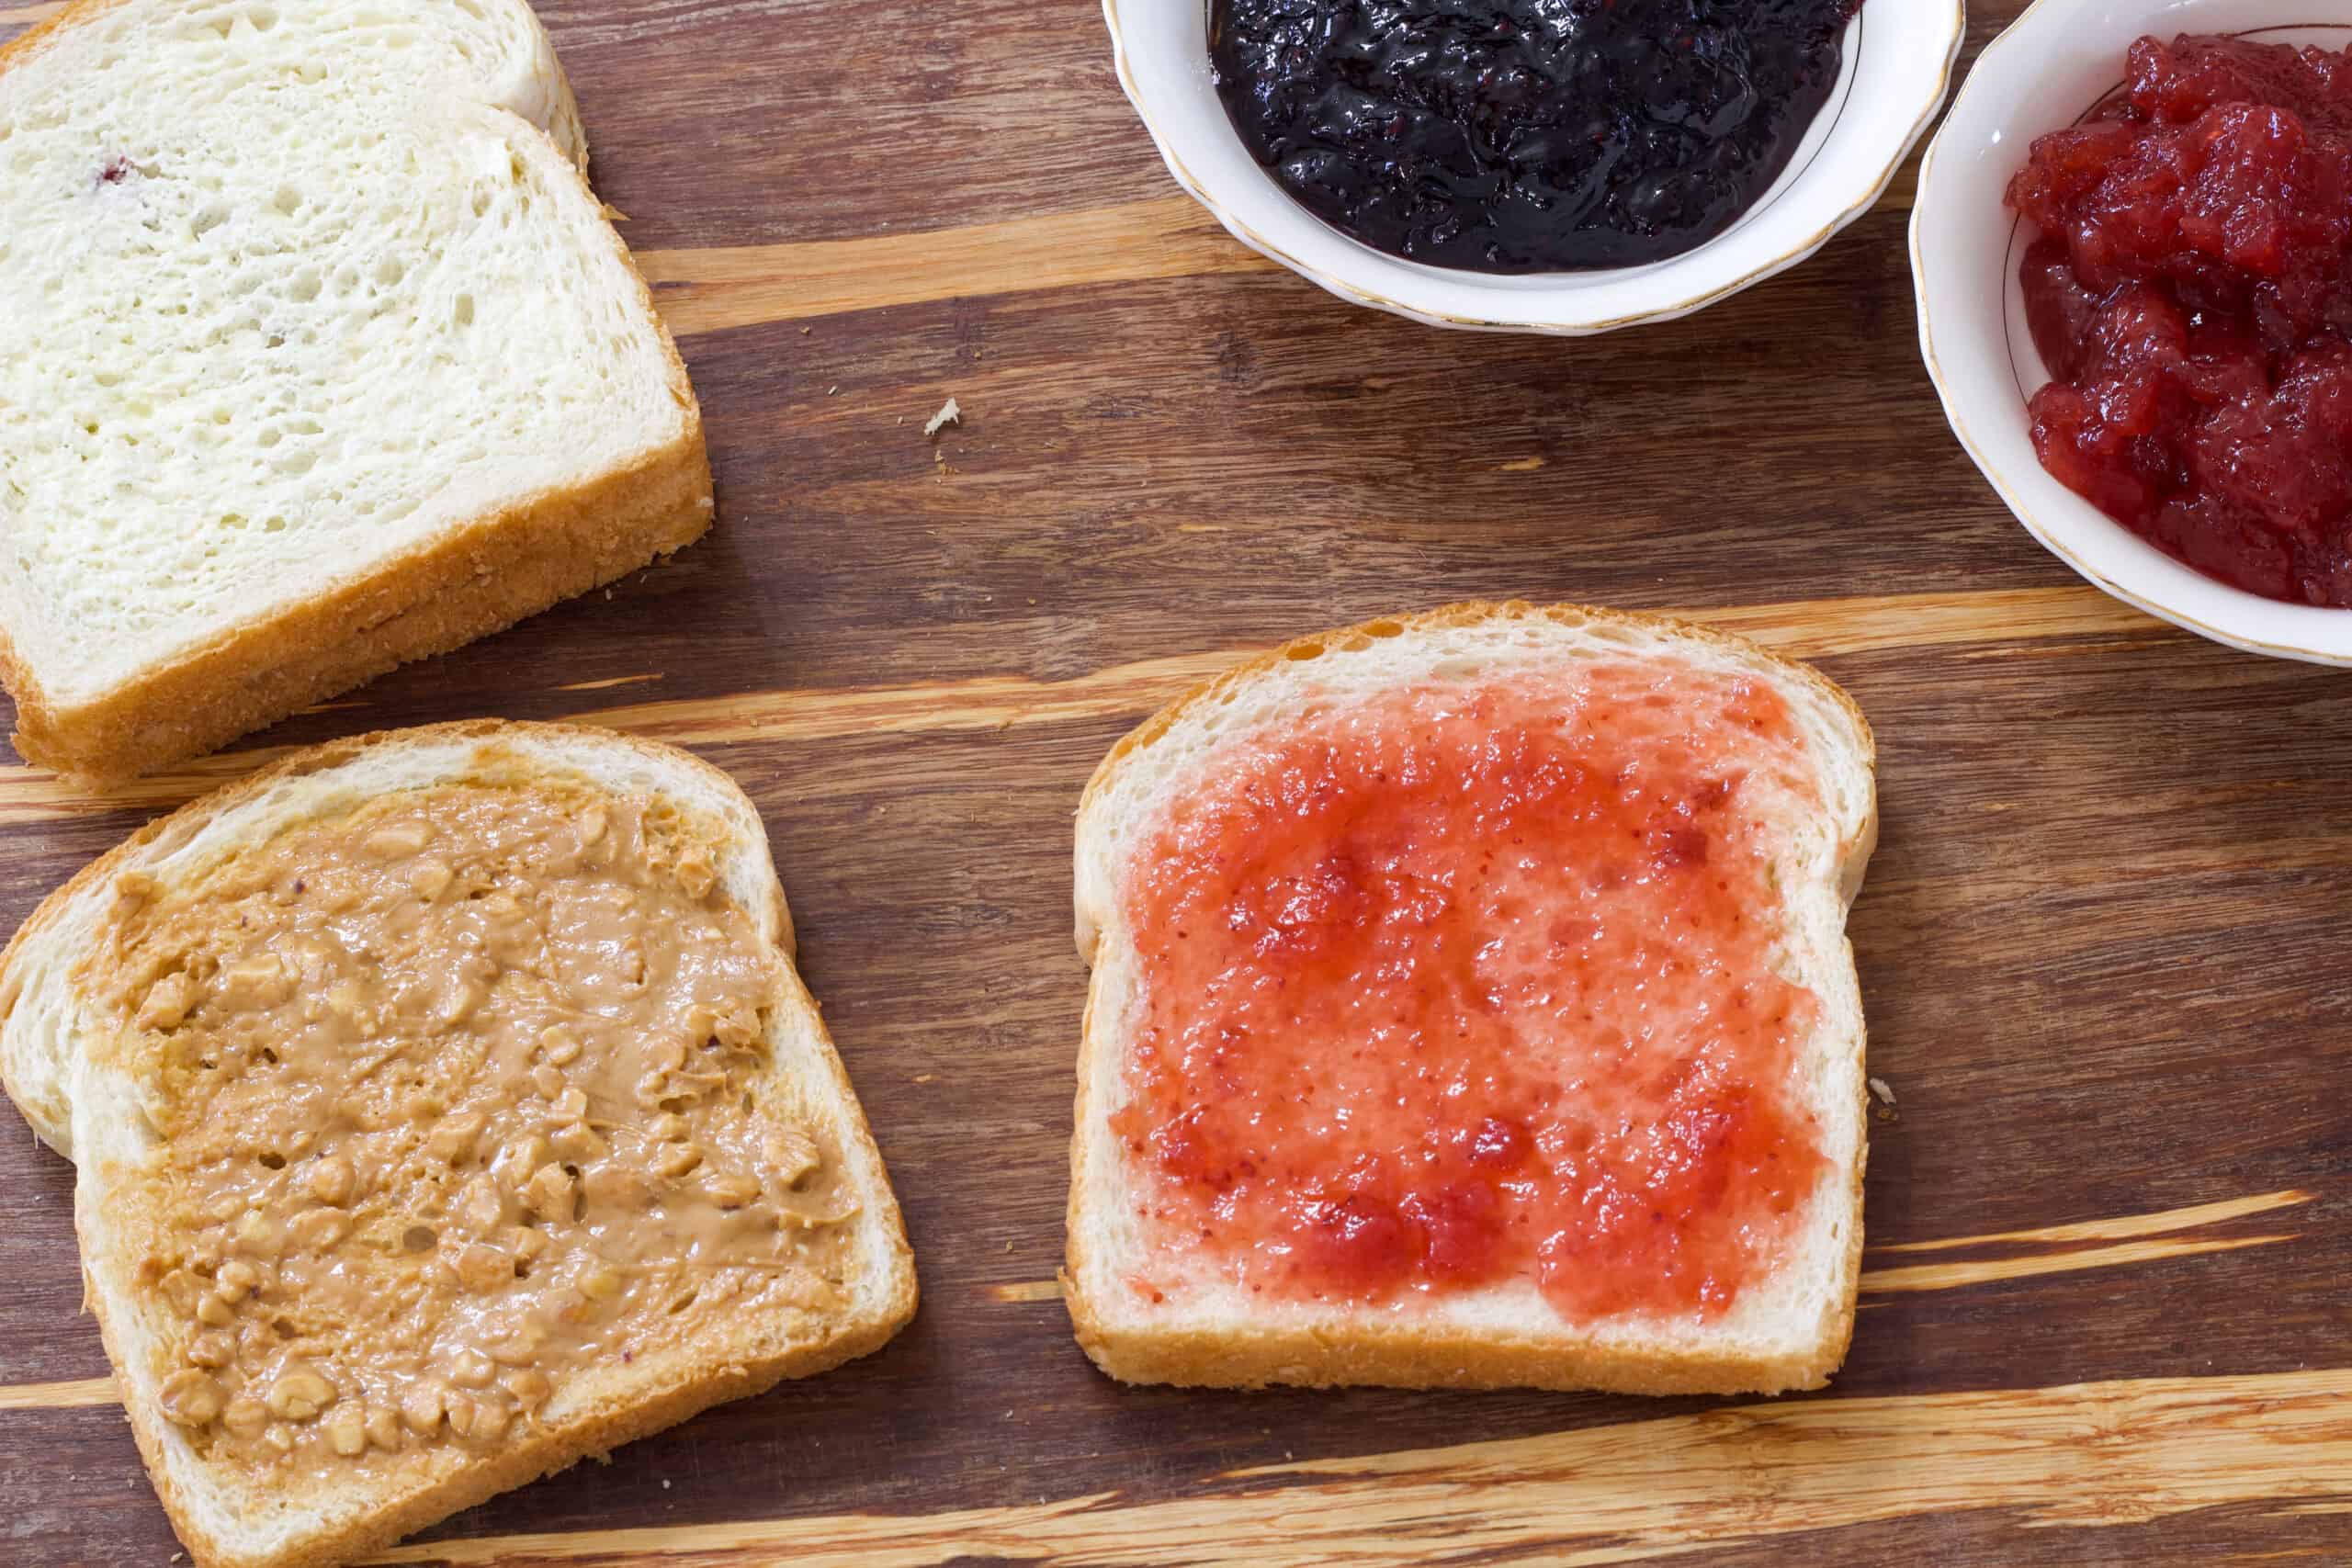 Bread on a wooden cutting board, one with peanut butter and one with jelly and a whole sandwich and two small bowls of jelly.